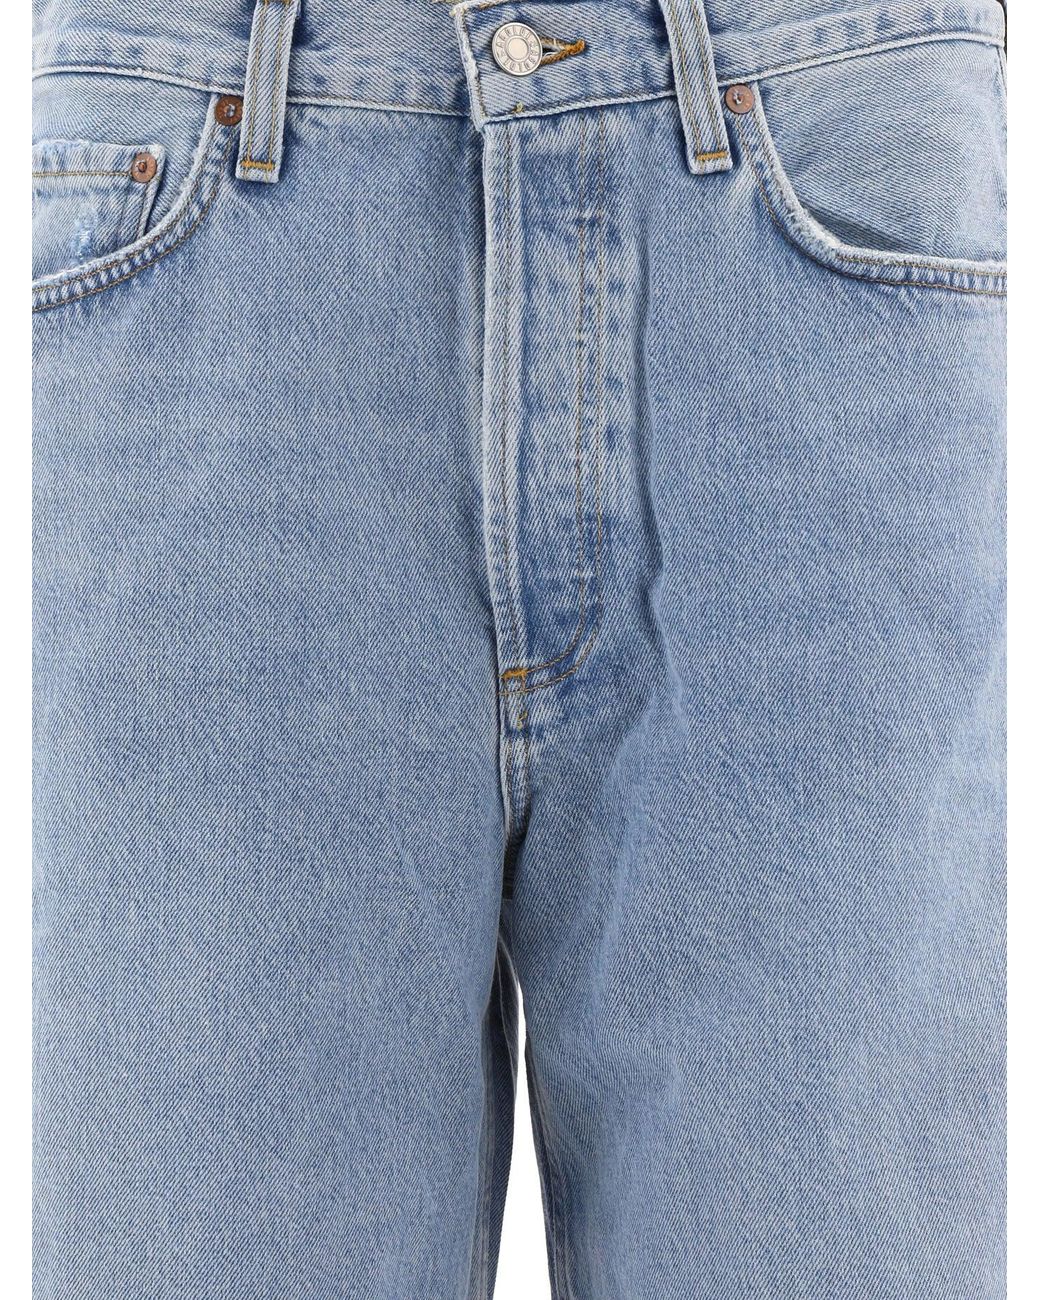 Agolde Denim "low Rise Baggy" Jeans in Light Blue (Blue) - Save 35% | Lyst